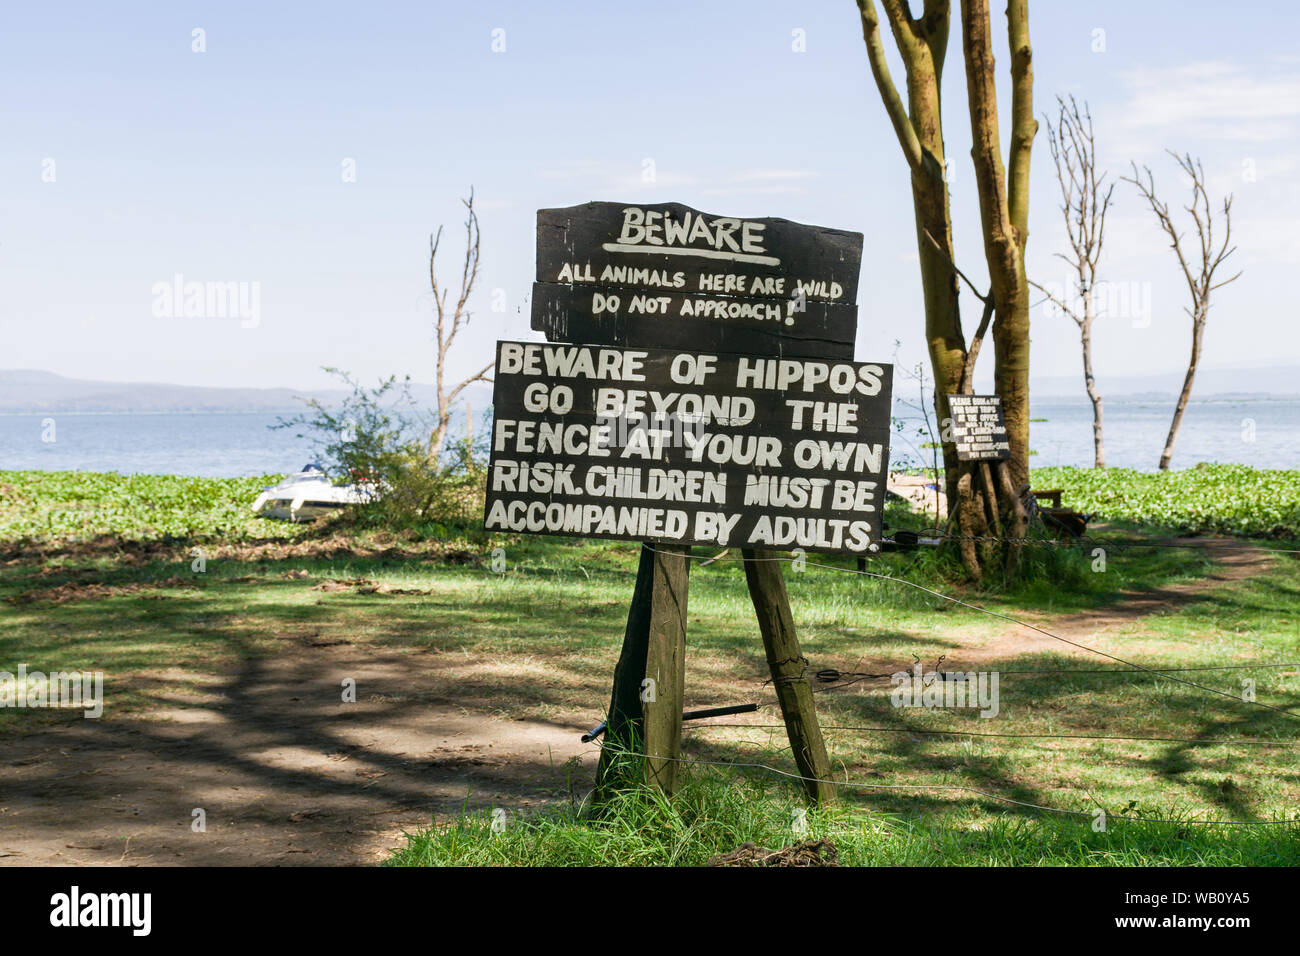 A large wooden sign with Beware of Hippos warning on it with lake Naivasha in background, Kenya Stock Photo